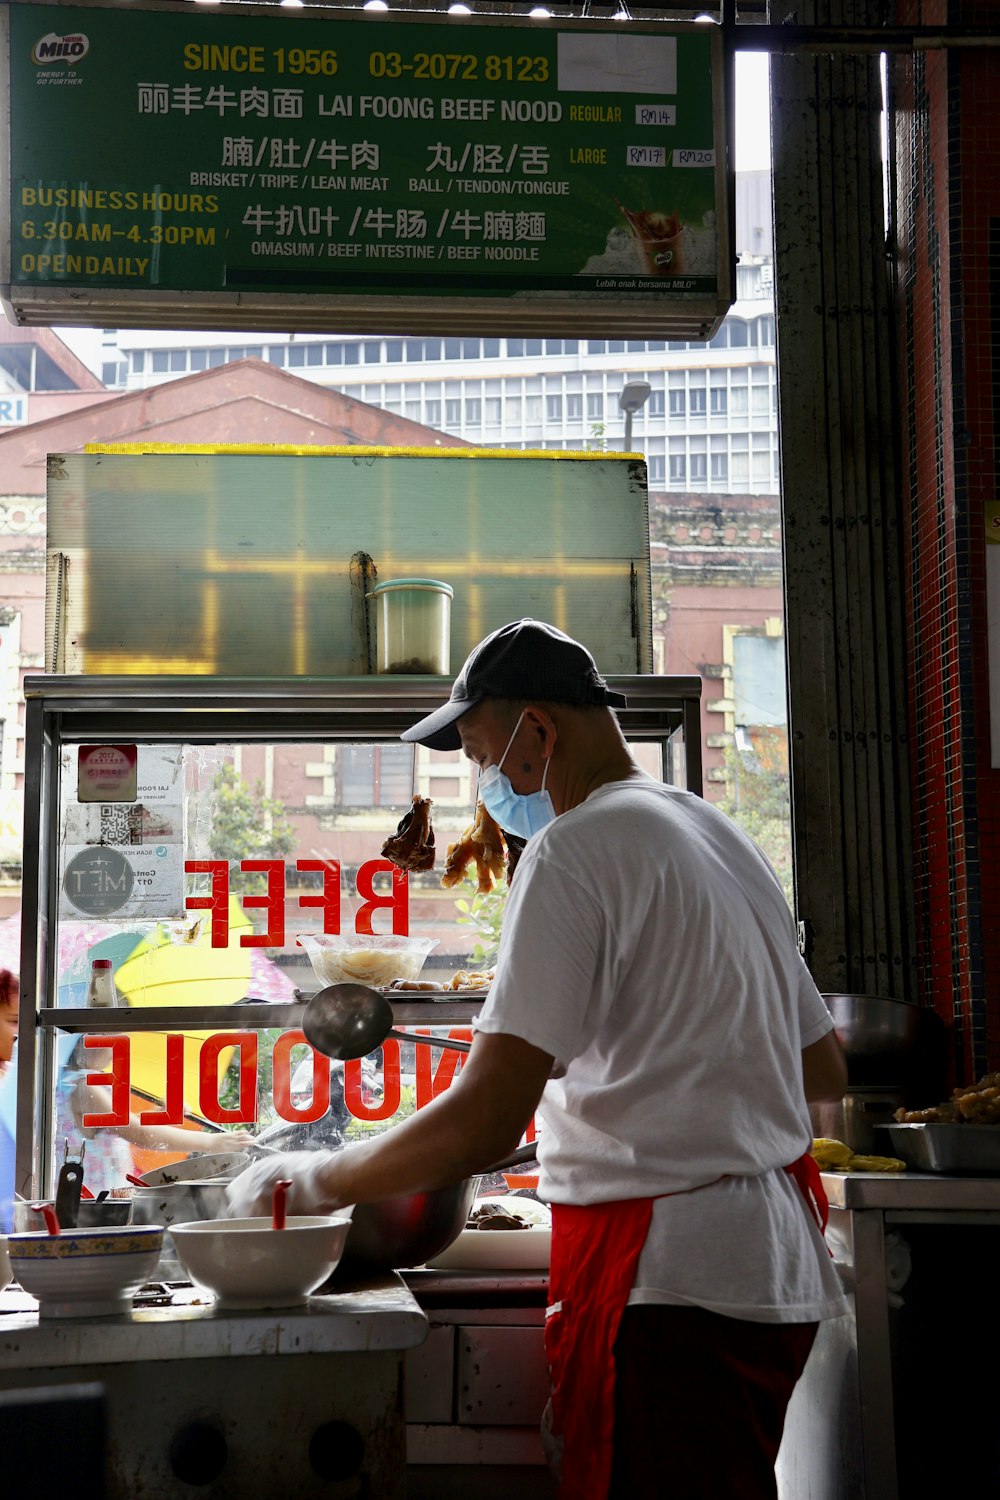 a man cooking food in a restaurant kitchen